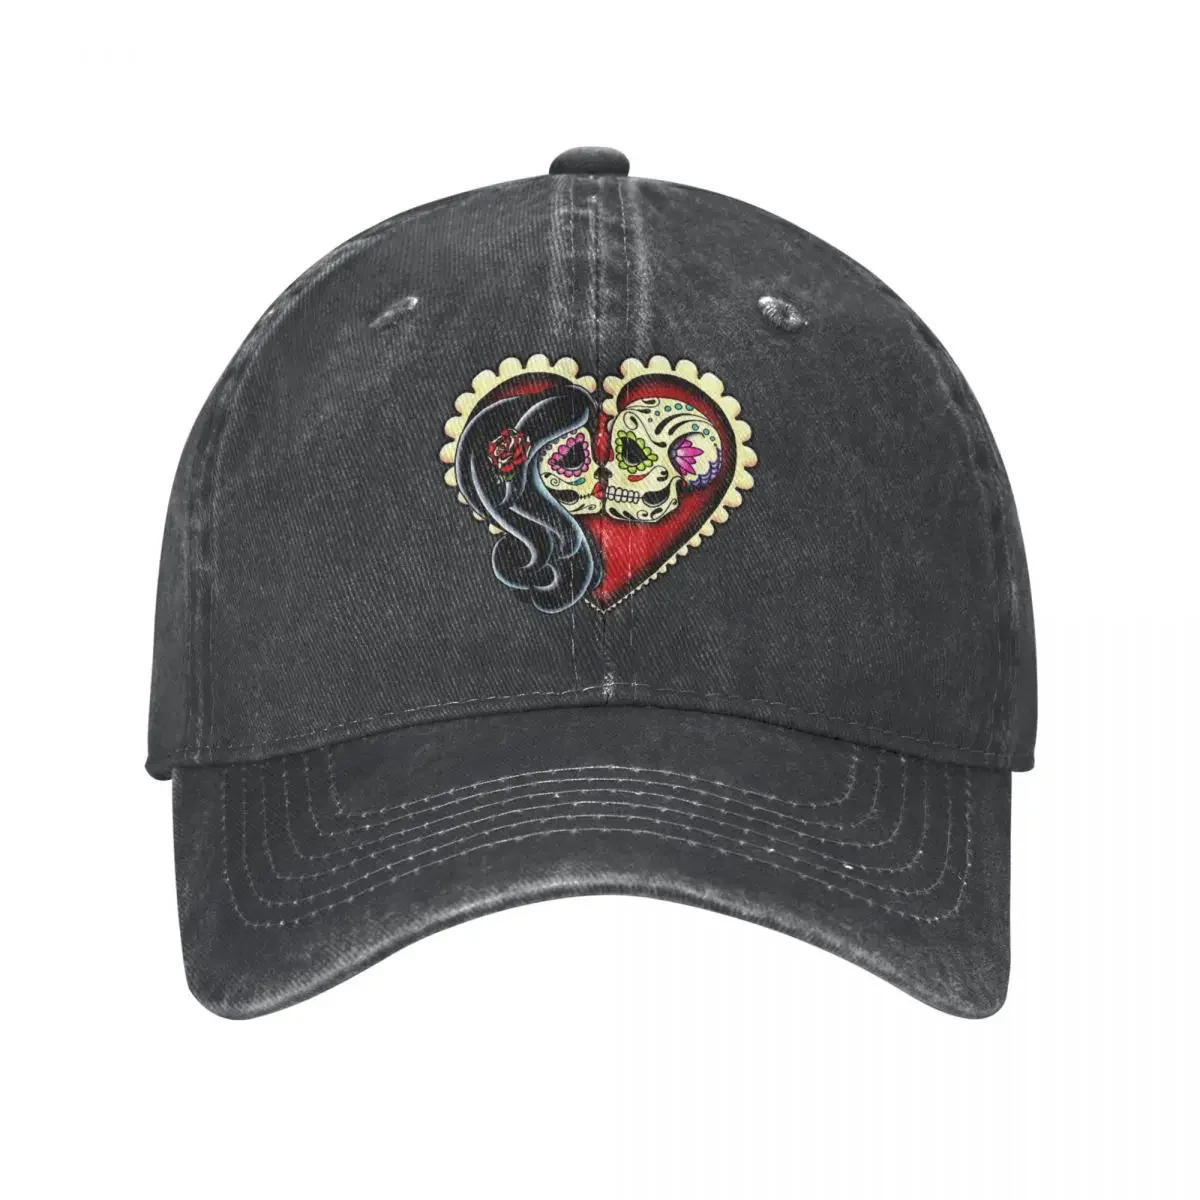 

Ashes - Day Of The Dead Couple - Sugar Skull Lovers Baseball Cap cowboy hat Peaked cap Cowboy Bebop Hats Men and women hats